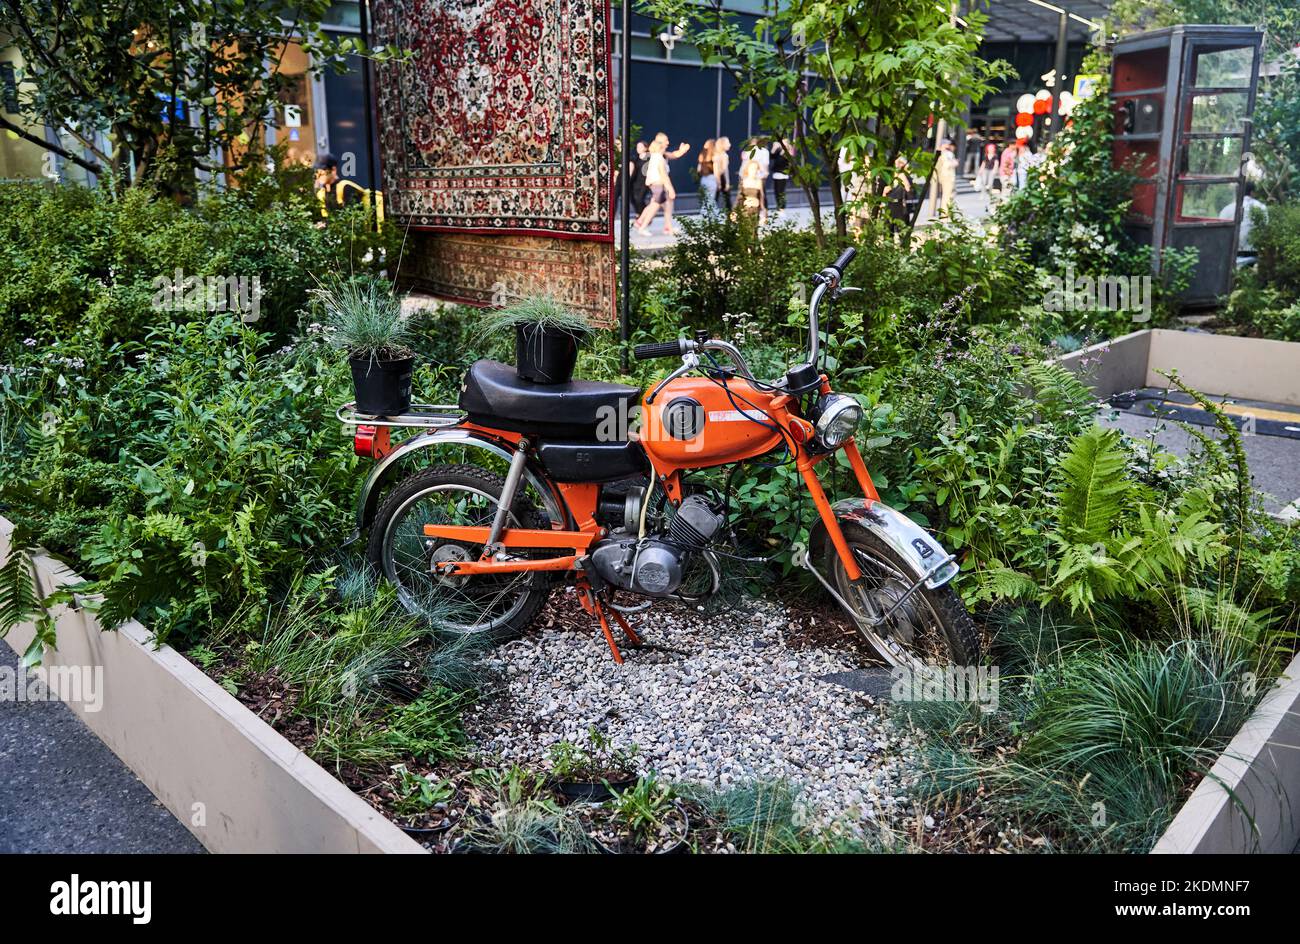 Moscow, Russia - 30.07.2022: A Soviet orange motorcycle standing among green plants Stock Photo